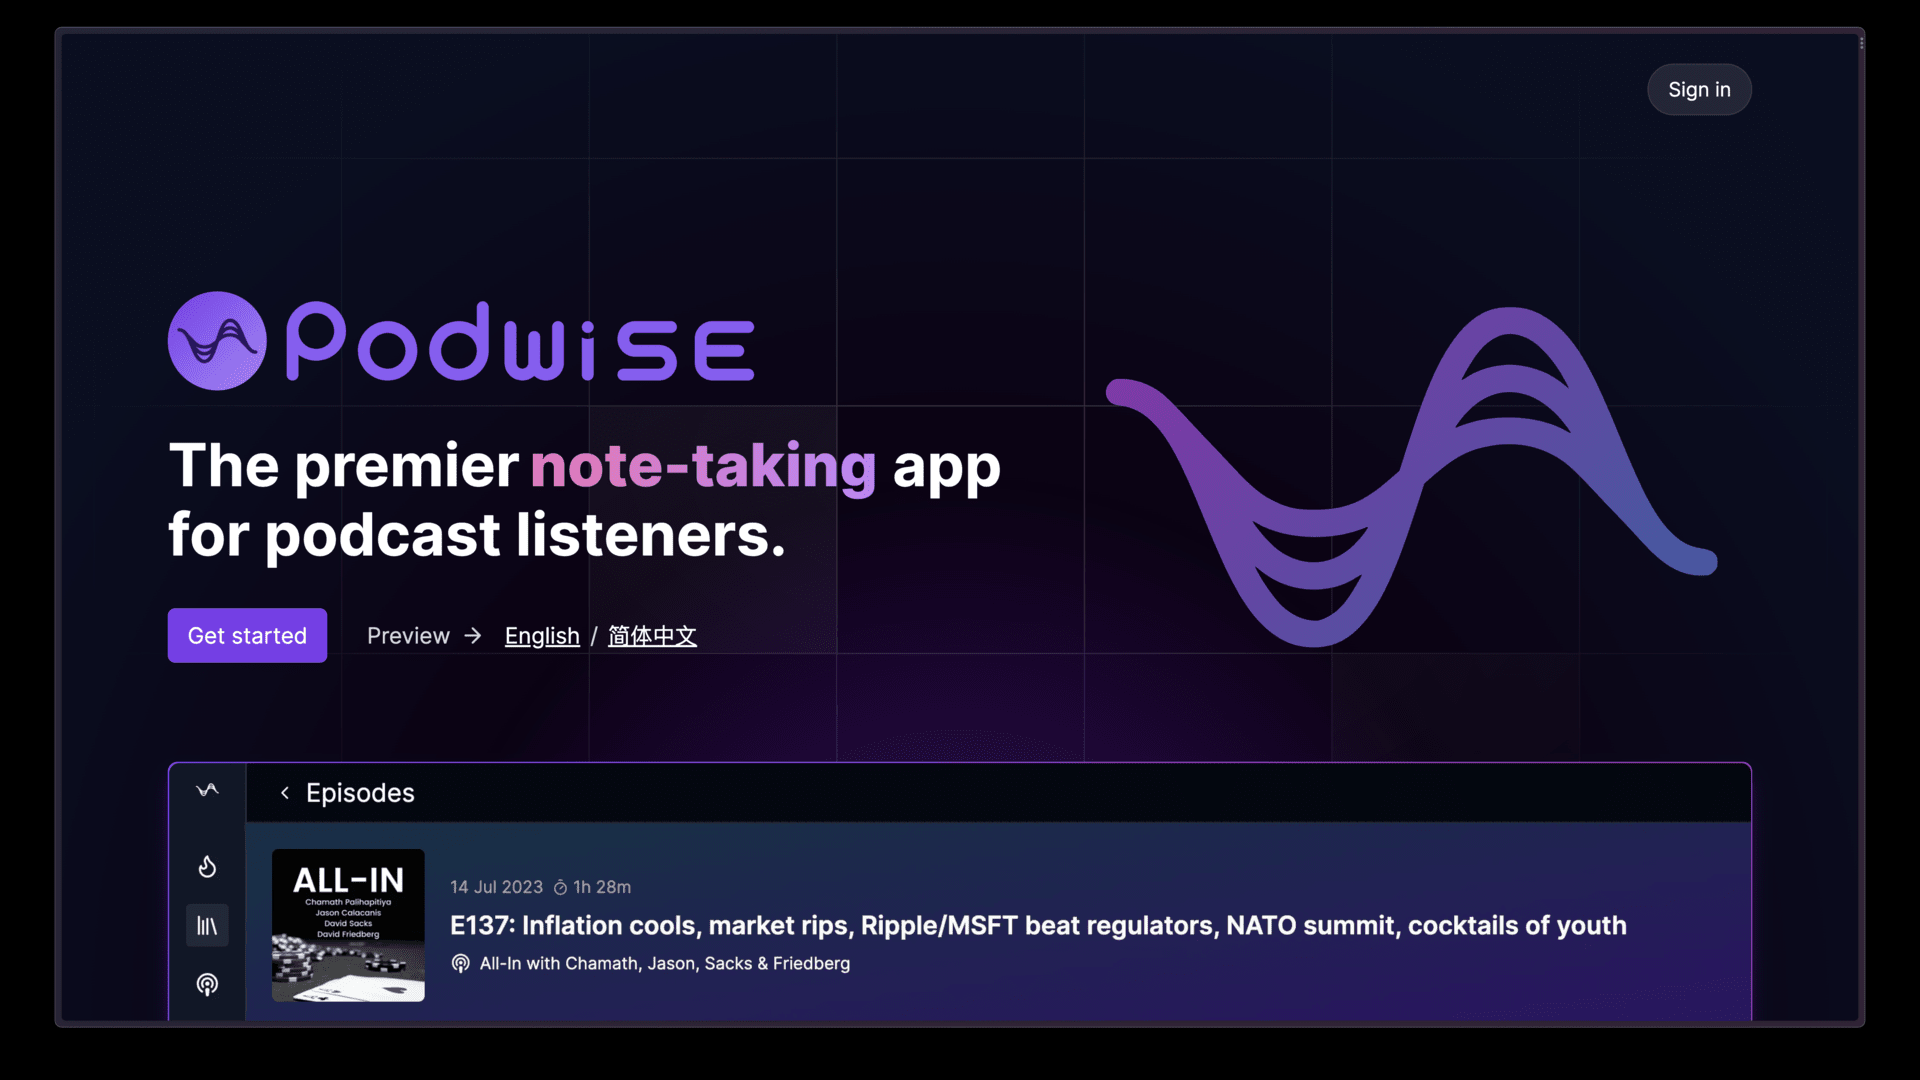 Podwise Landing page